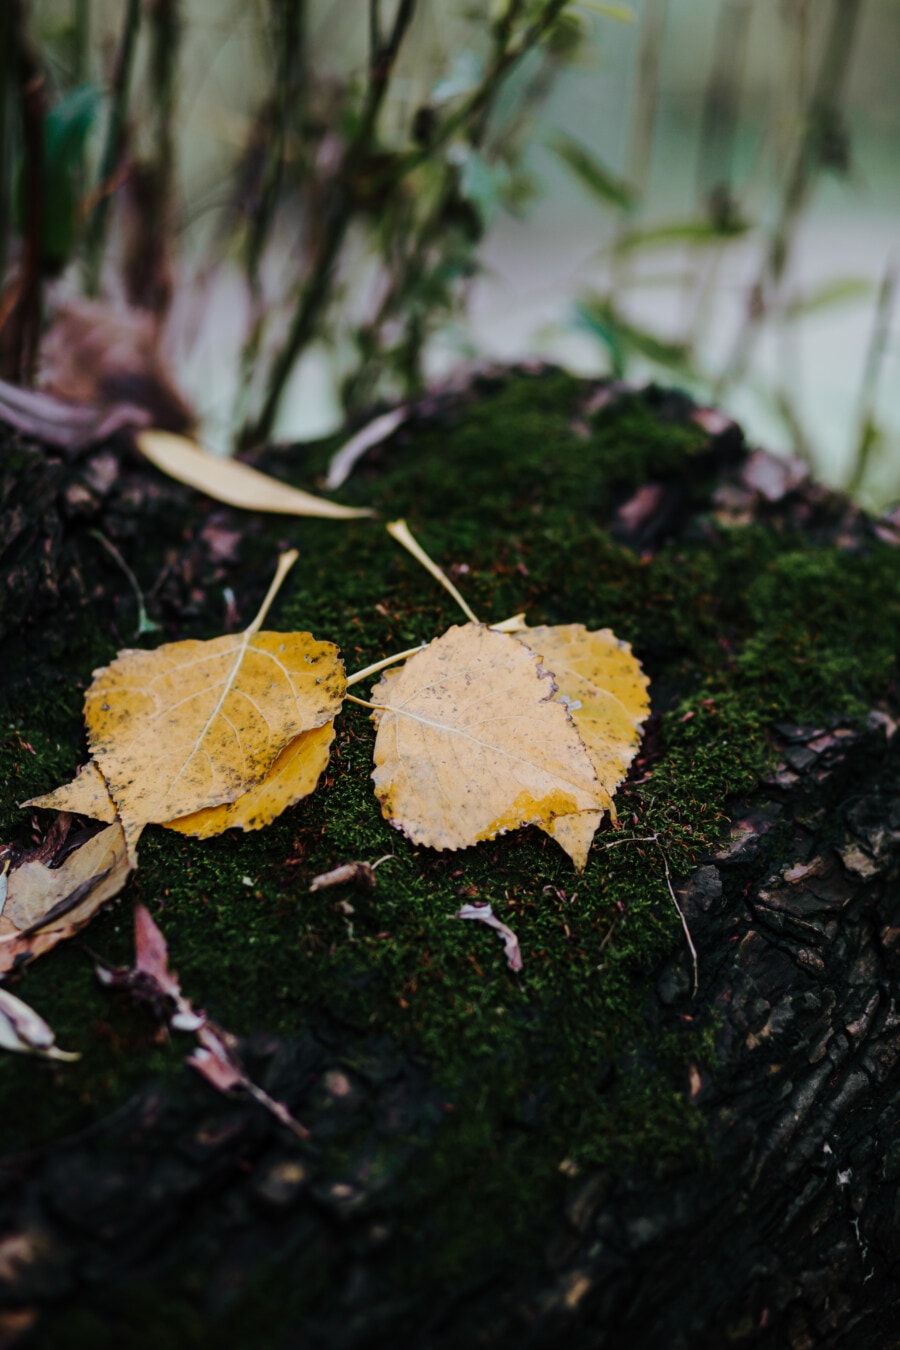 yellowish, yellowish brown, yellow leaves, mossy, lichen, autumn, leaves, leaf, herb, plant